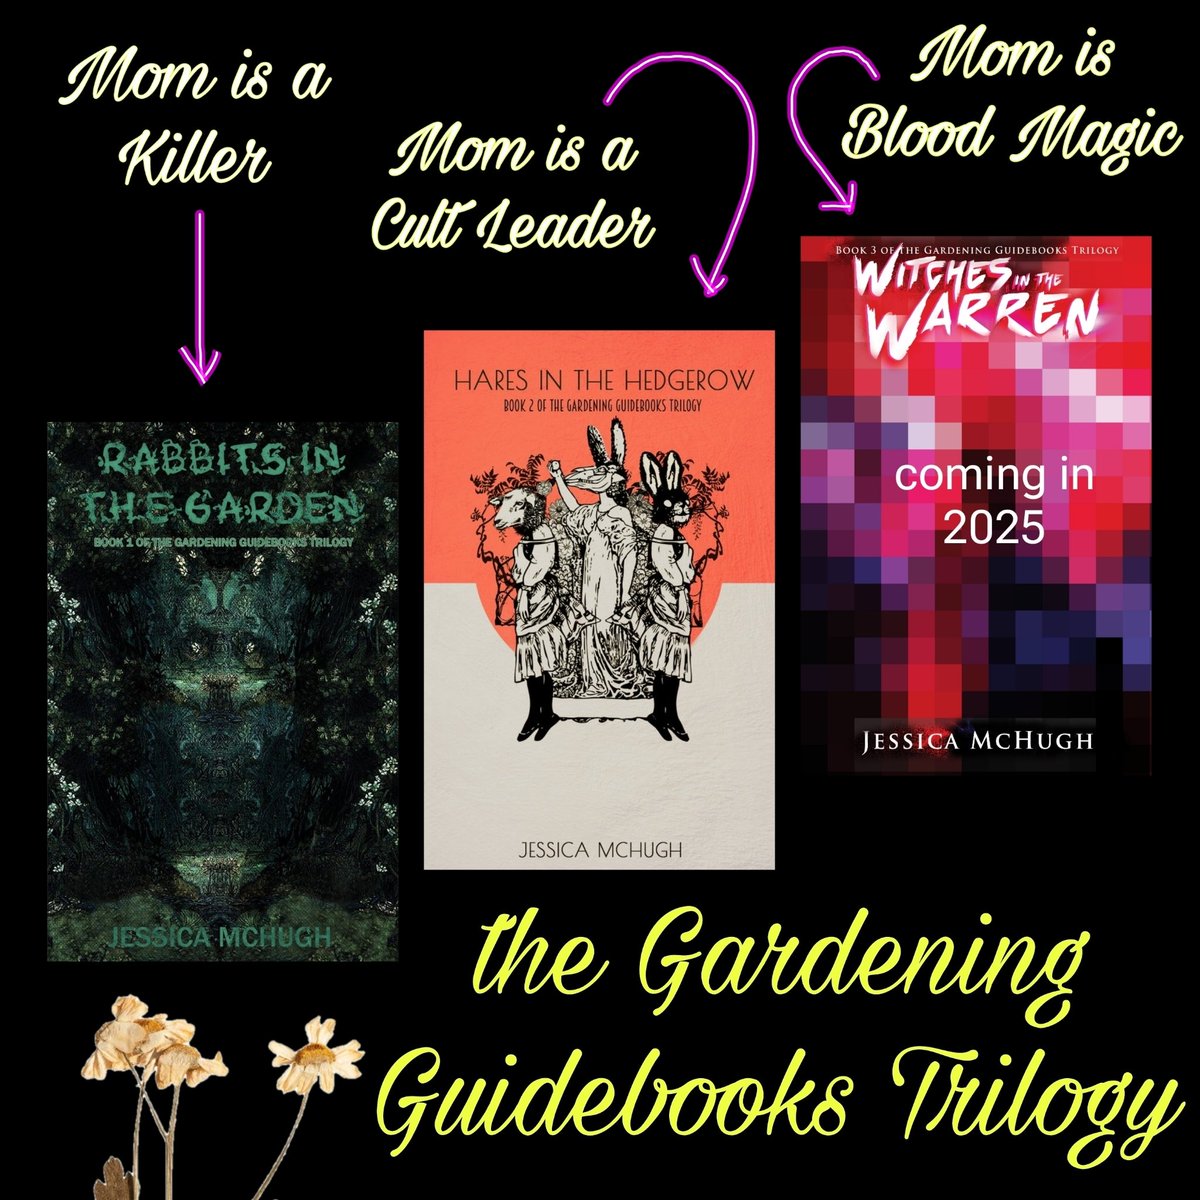 Happy Mother's Day to all the moms who tended their gardens the best they could. 🥀✂️🐰🩸 Catch up on all the mama drama at @GhoulishBooks (Ghoulish.RIP) before the final book comes out next year!